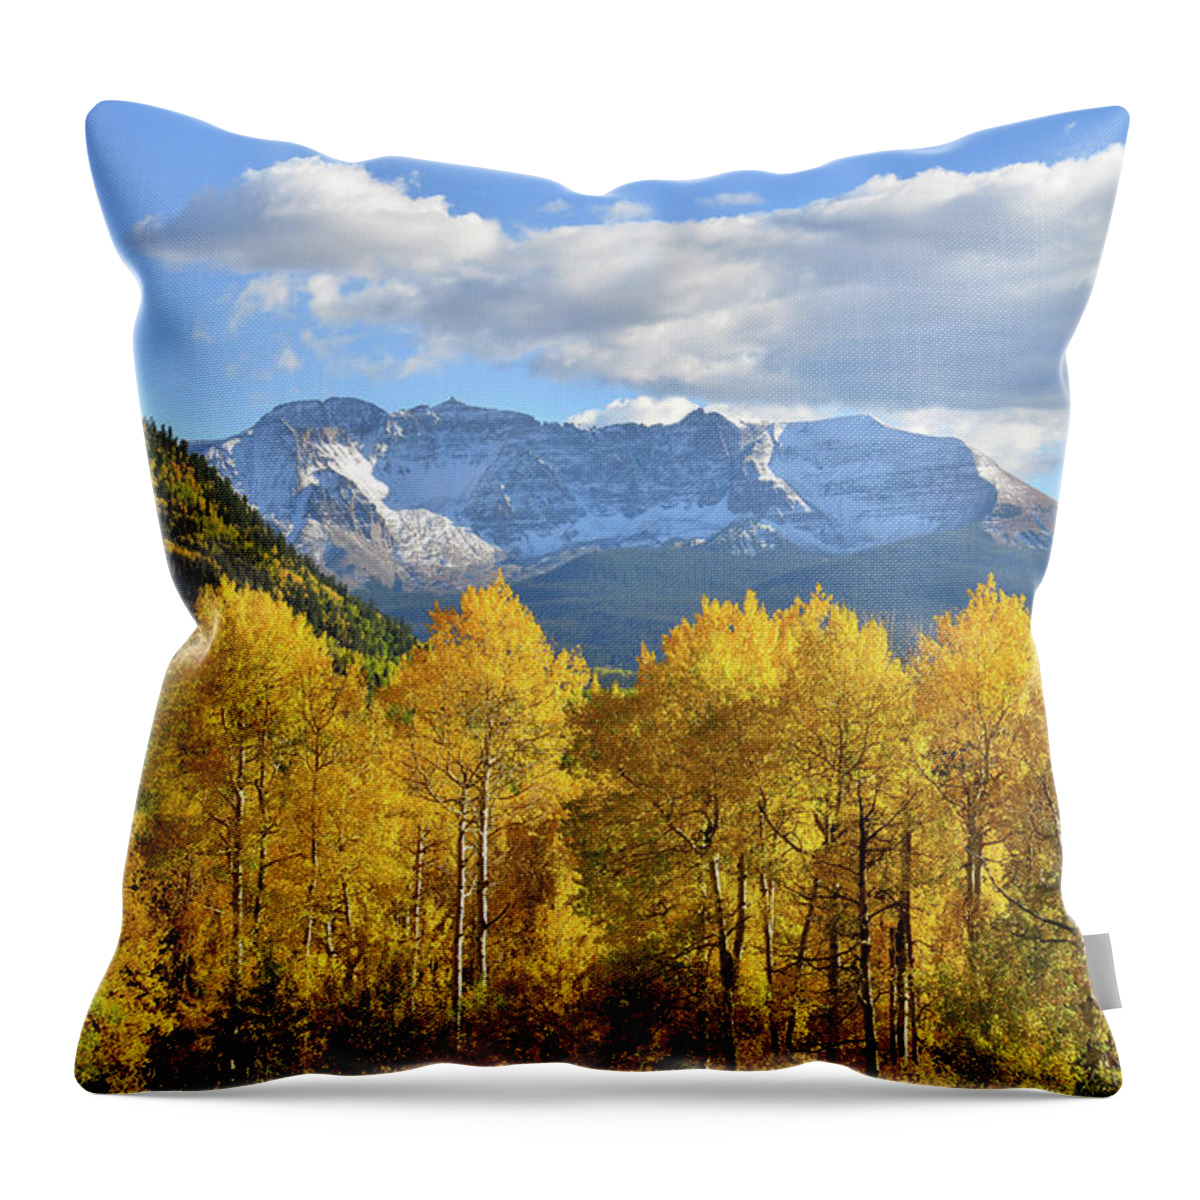 Colorado Throw Pillow featuring the photograph Highway 145 Colorado #2 by Ray Mathis